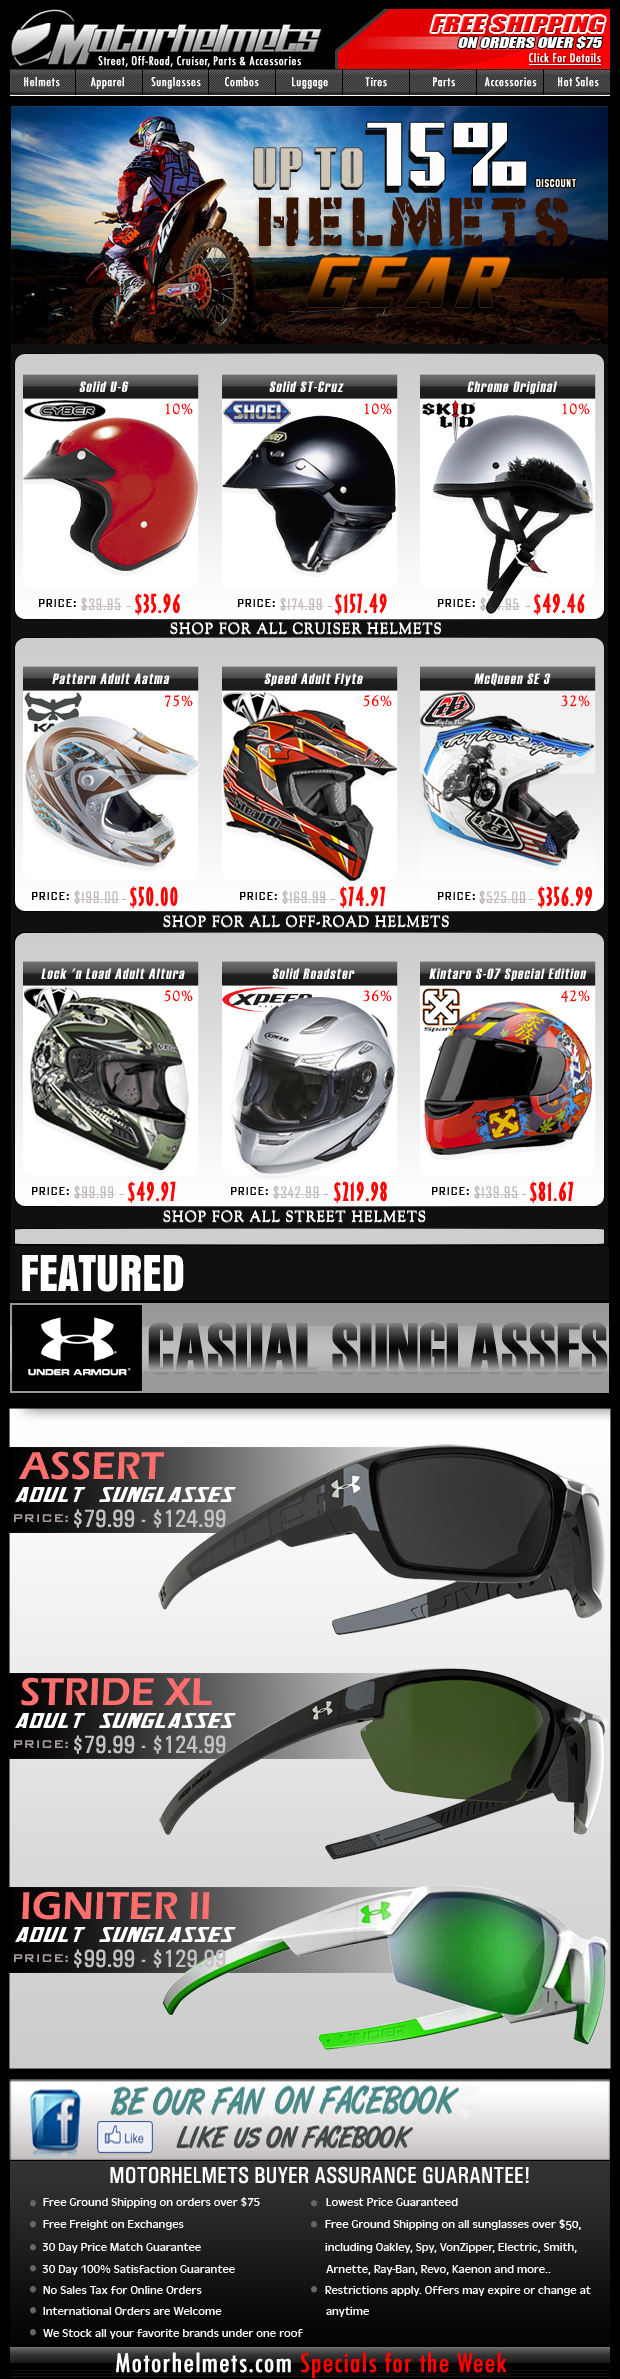 Helmet Specials...Save up to 75% Off on Closeouts from Shoei, TLD and more!